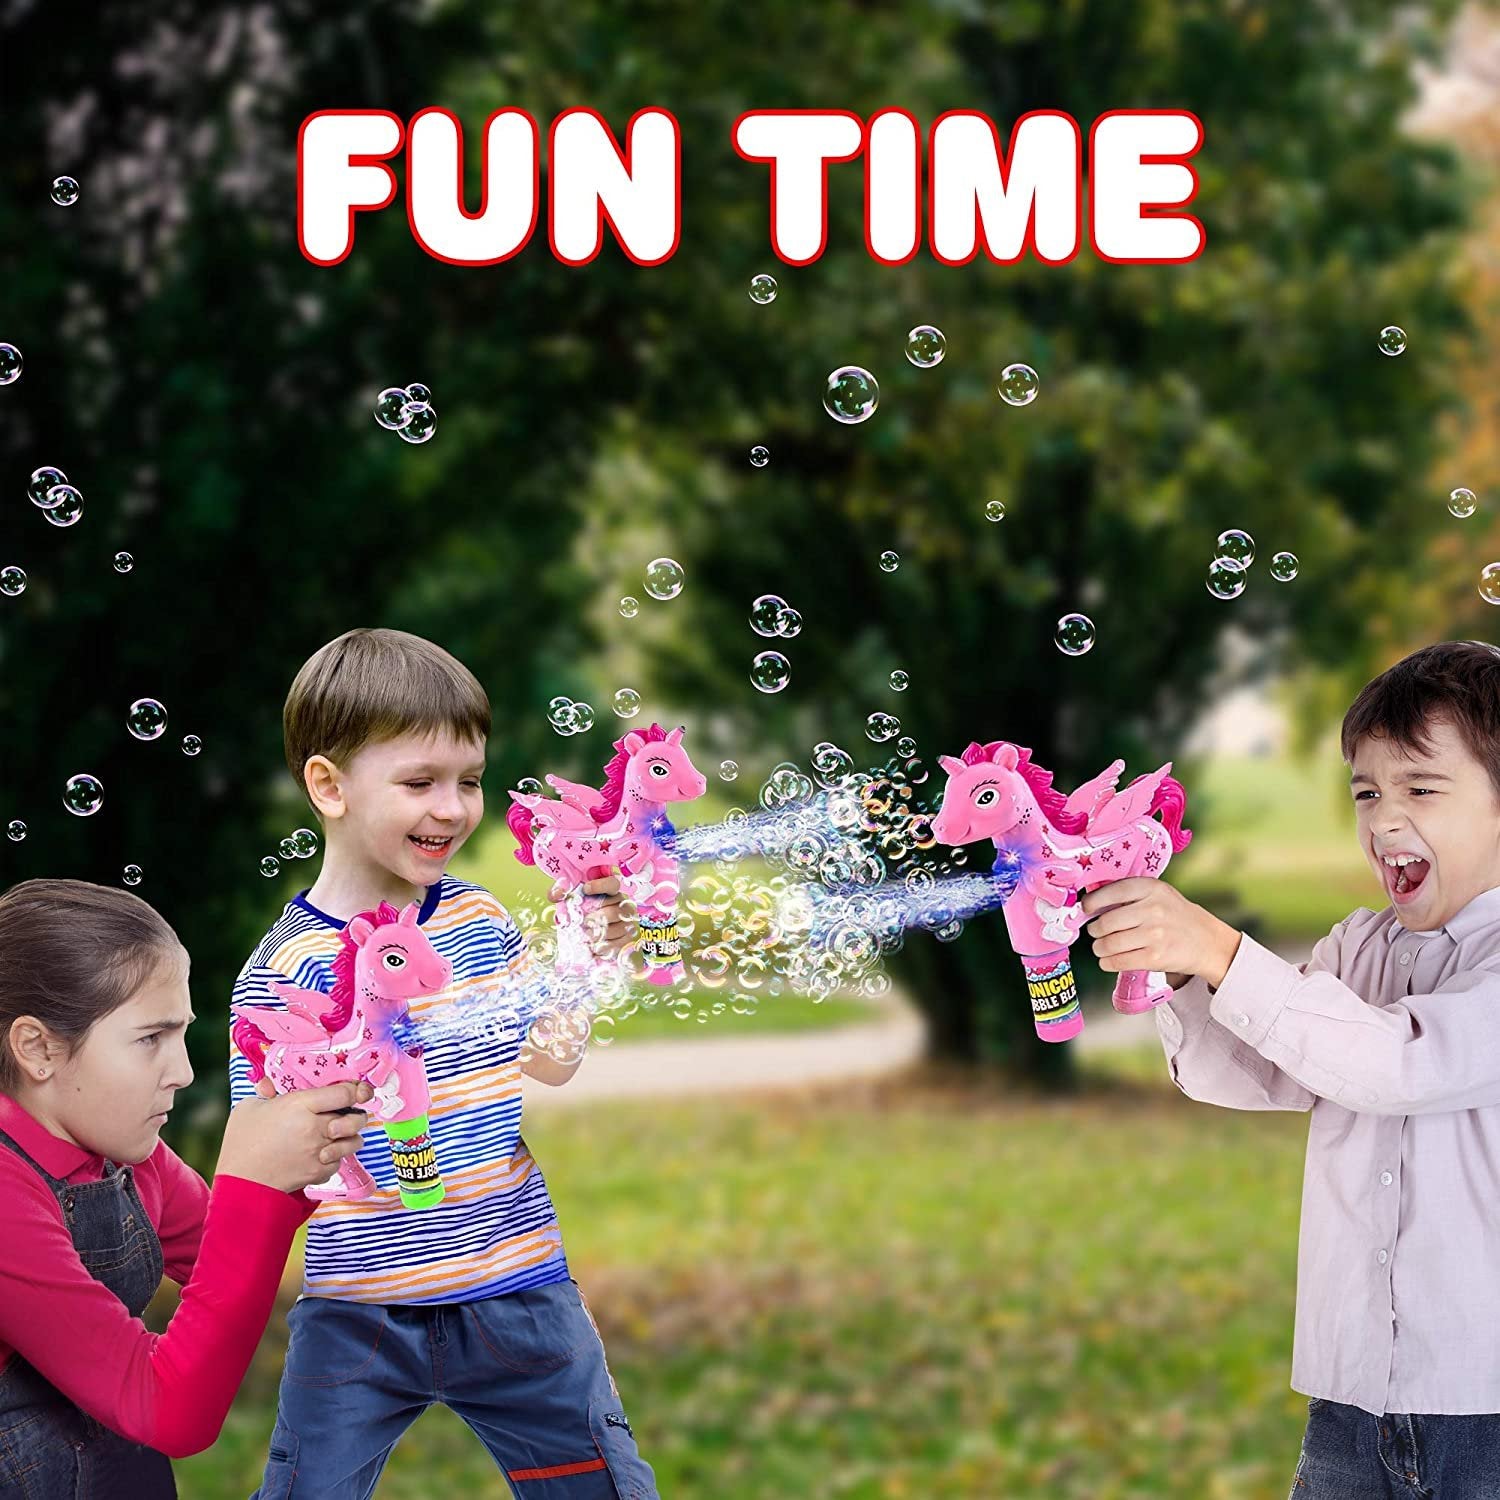 Pink Unicorn Bubble Blaster with Light and Sound, Includes 1 Bubble Gun & 2 Bottles of Bubble Solution, Fun Summer Toy for Girls and Boys